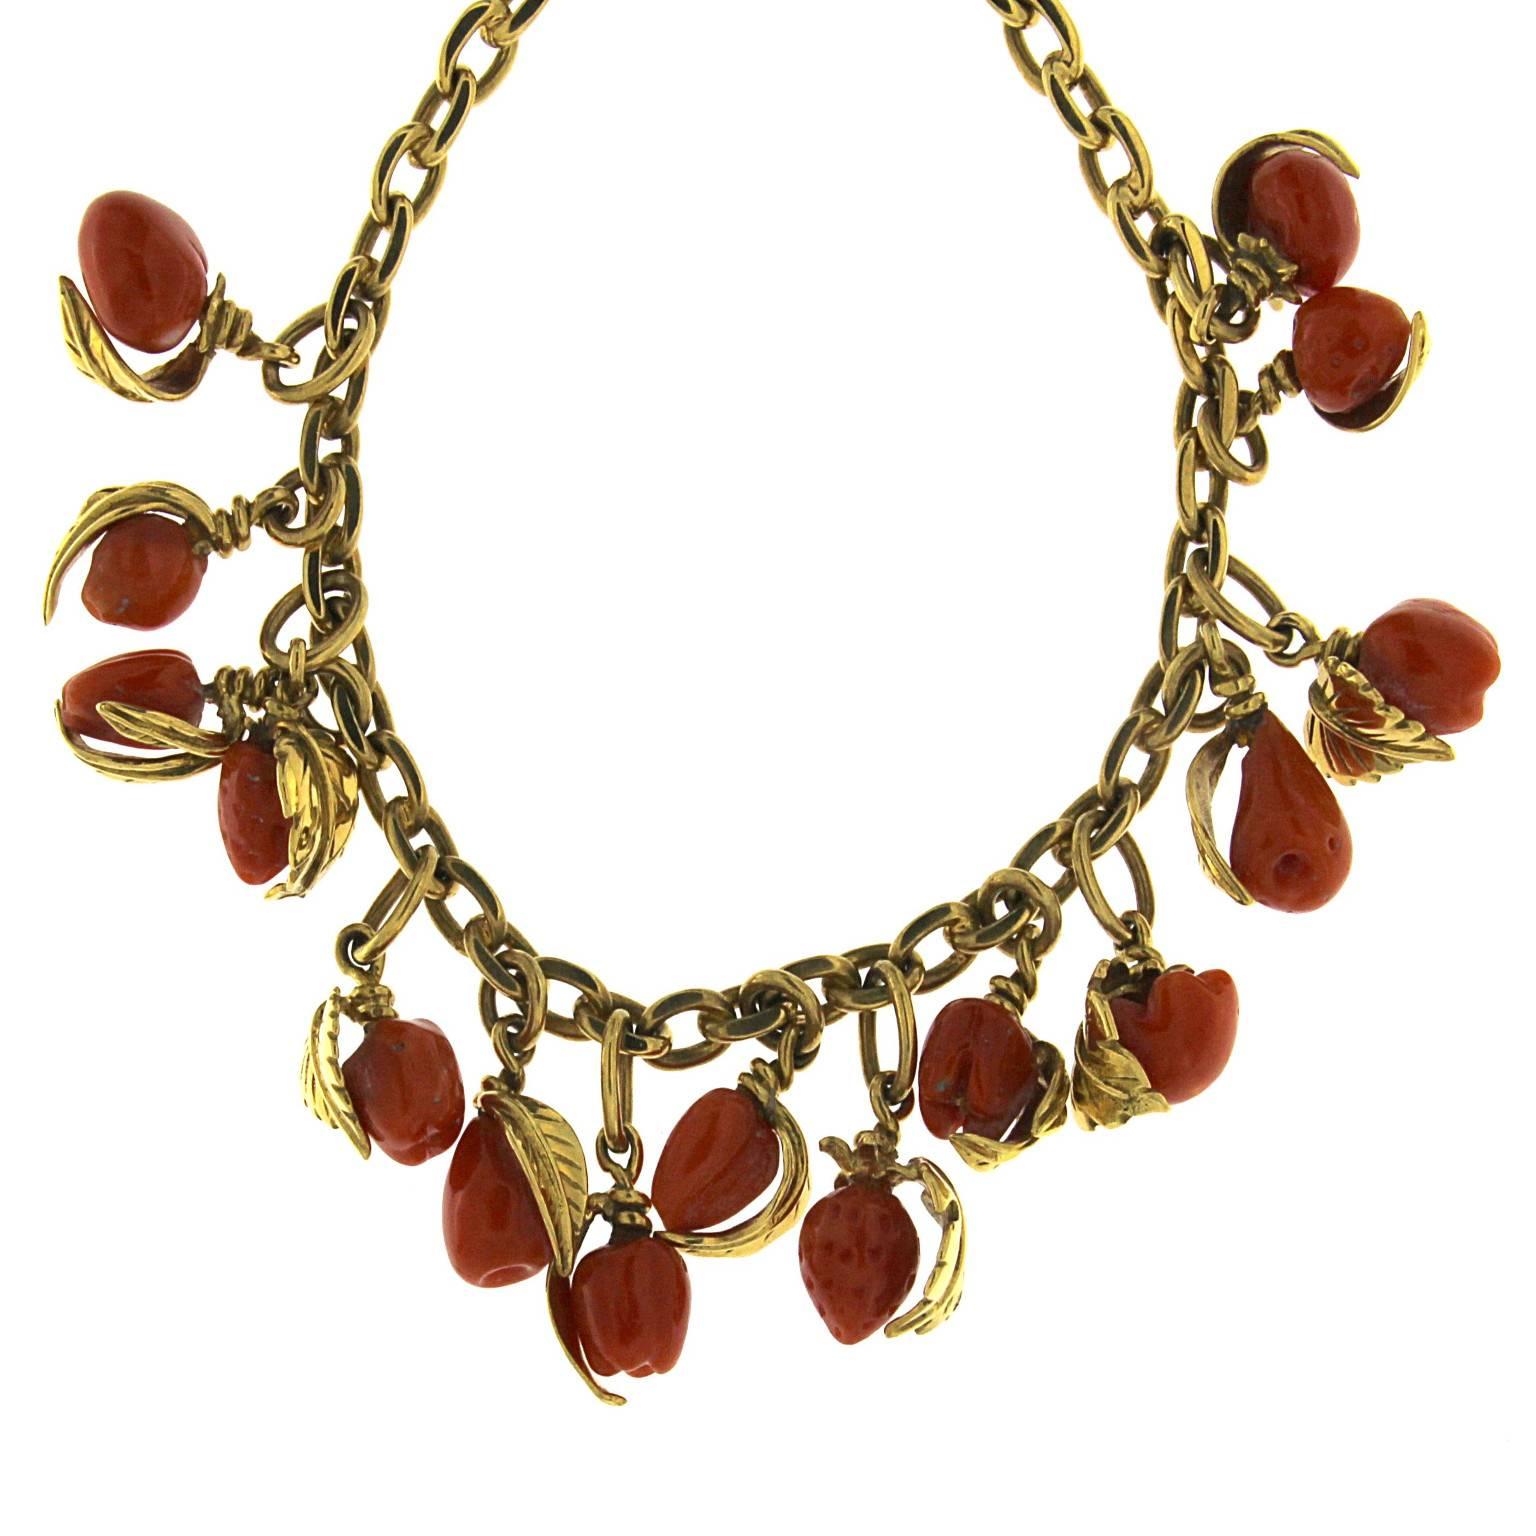 Rich necklace in 18 kt gold with nice sculptured multi fruits in red old coral
Each fruit has its own leaf; they have been sculptured one by one
The total weight of the gold is 41 gr
The total weight of the coral is 9 gr
Stamp: 750